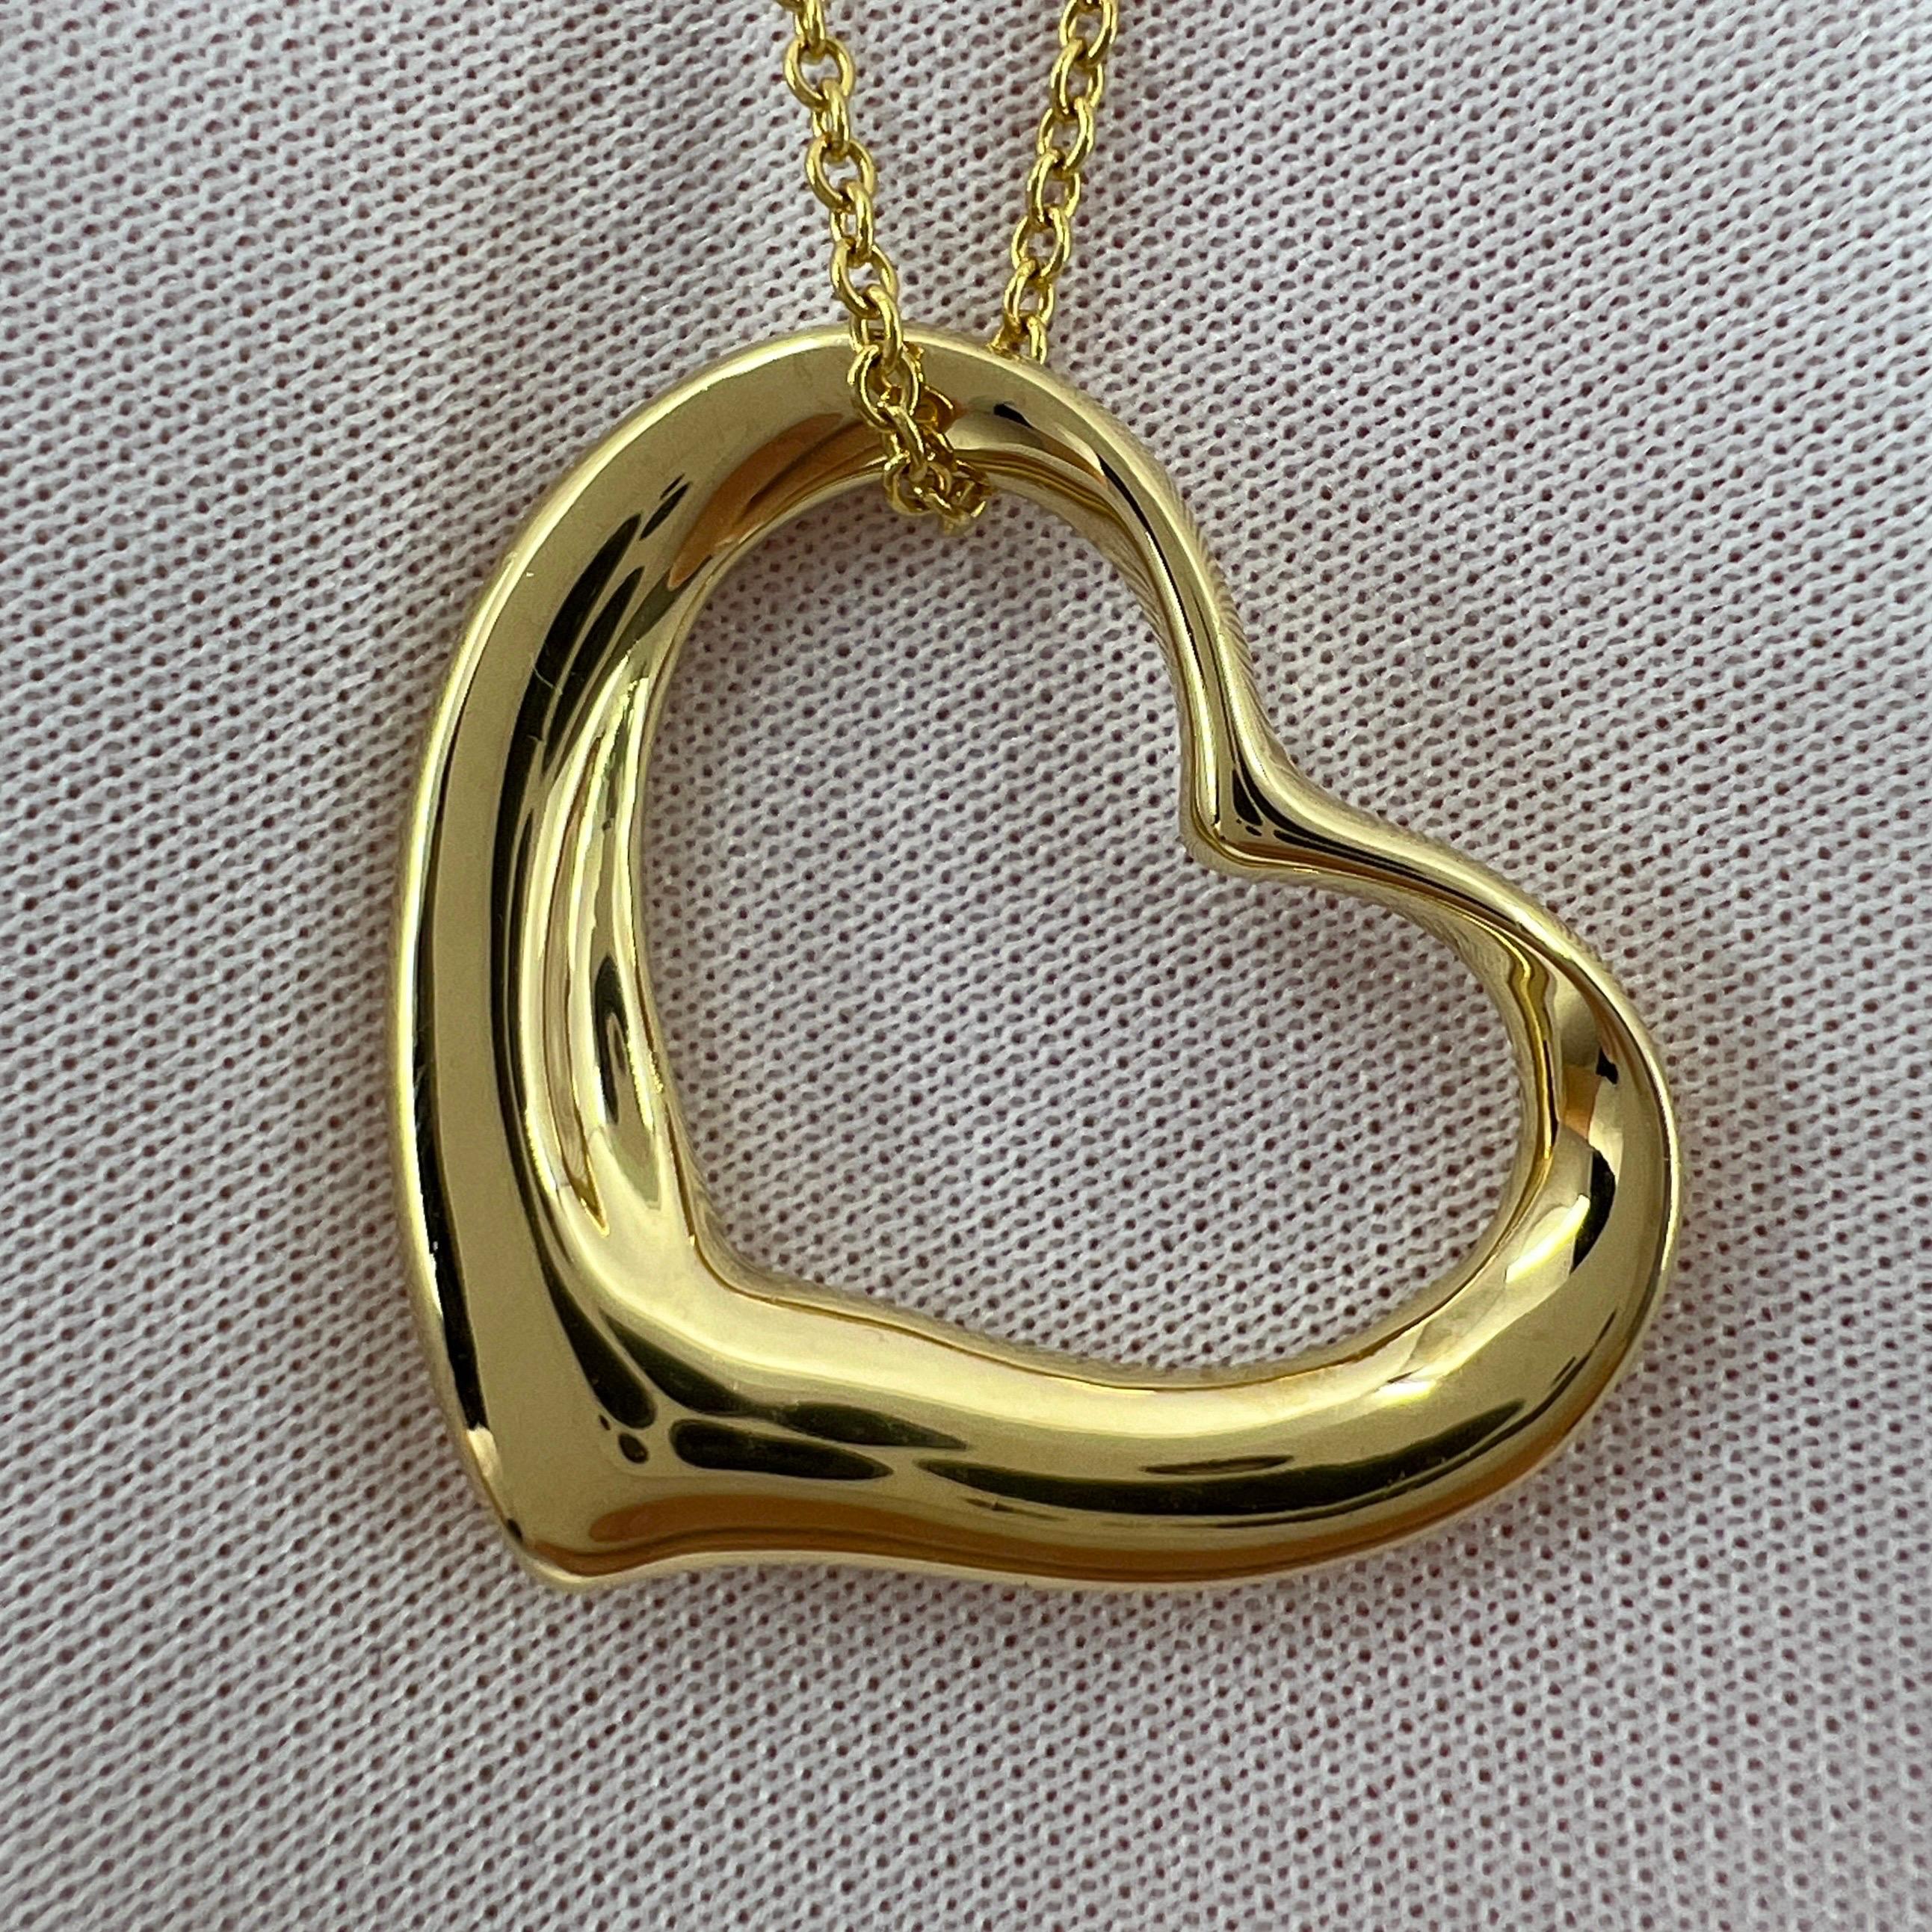 Tiffany & Co. Elsa Peretti Extra Large Open Heart 18k Gold Pendant Necklace For Sale 1